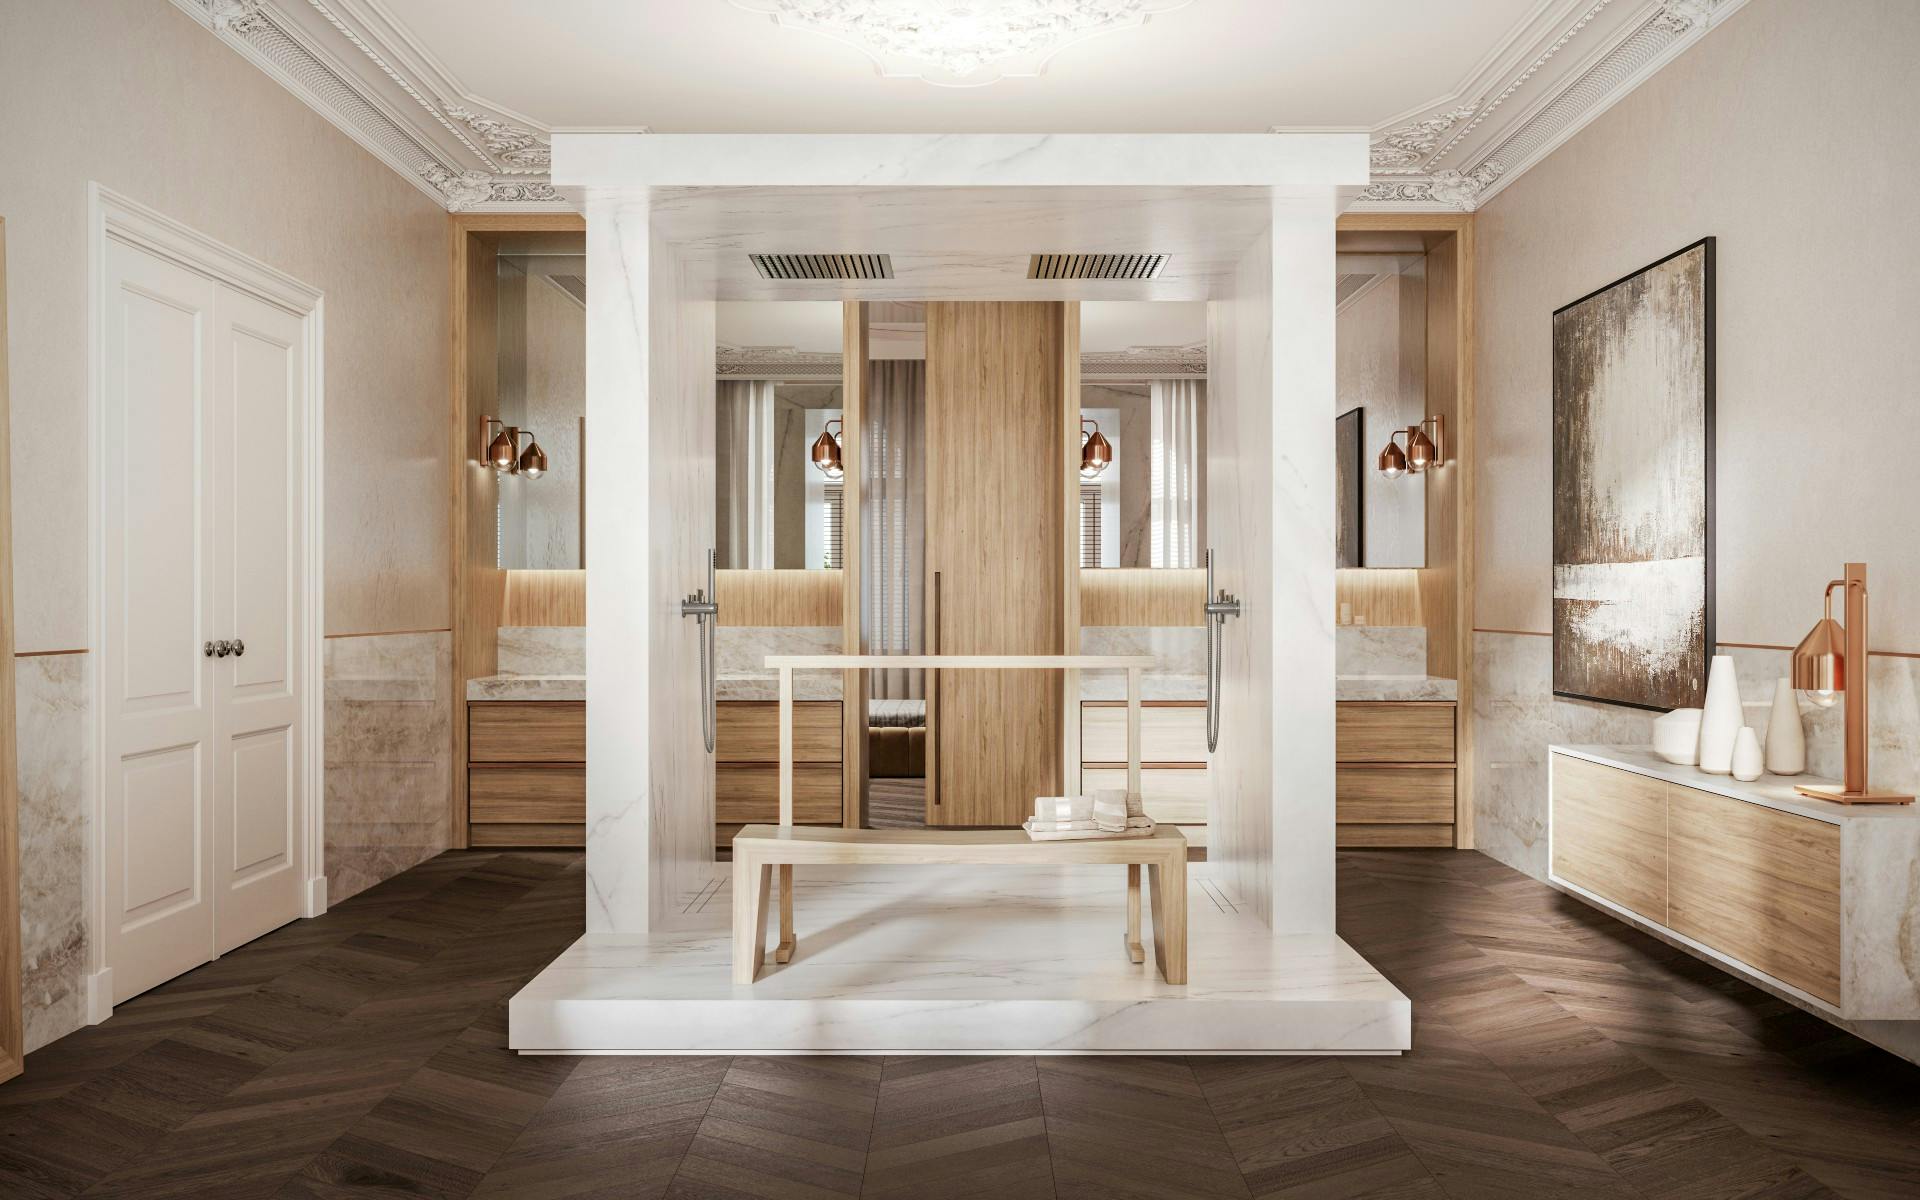 Image number 40 of the current section of Travertino: the bathroom by Daniel Germani that brings the water rituals up to date of Cosentino USA